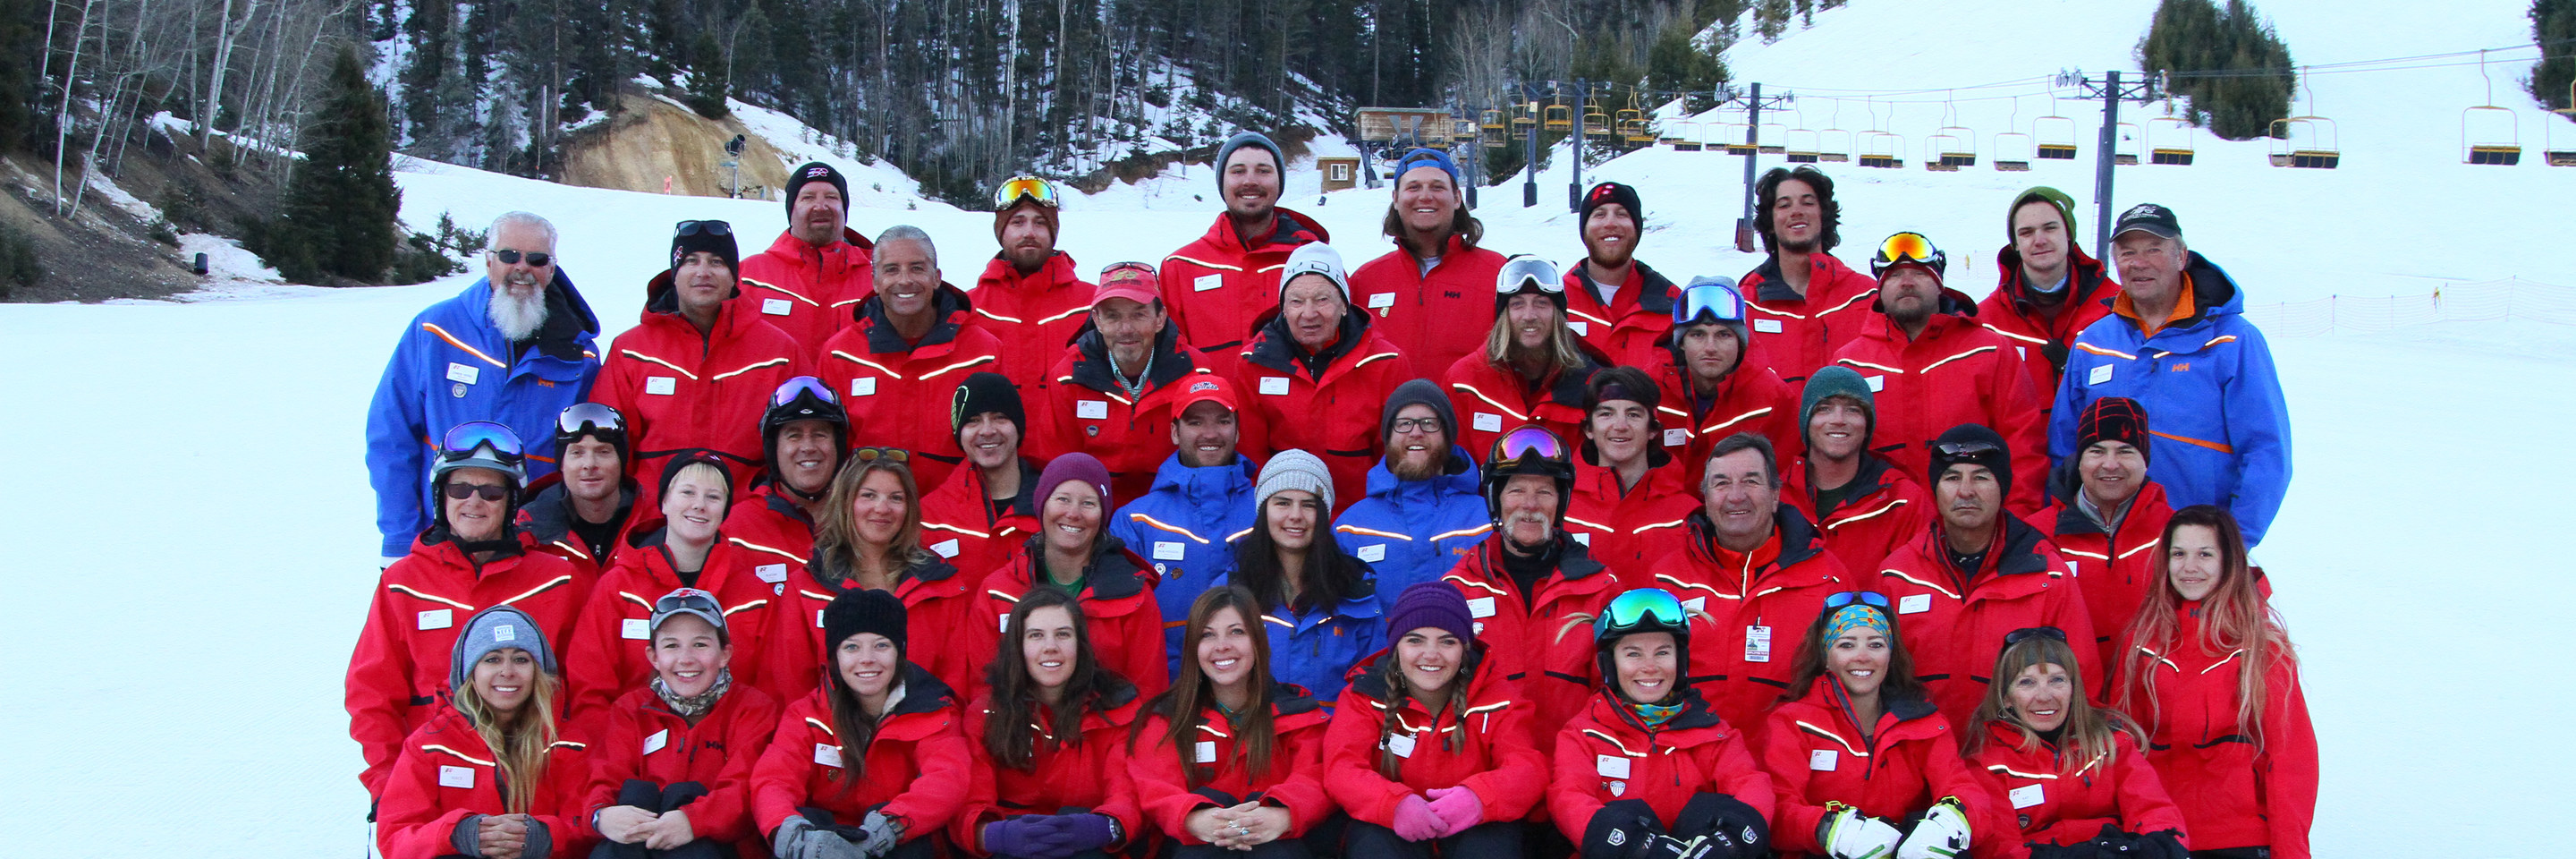 ski coaches promoting employment and good jobs in New Mexico